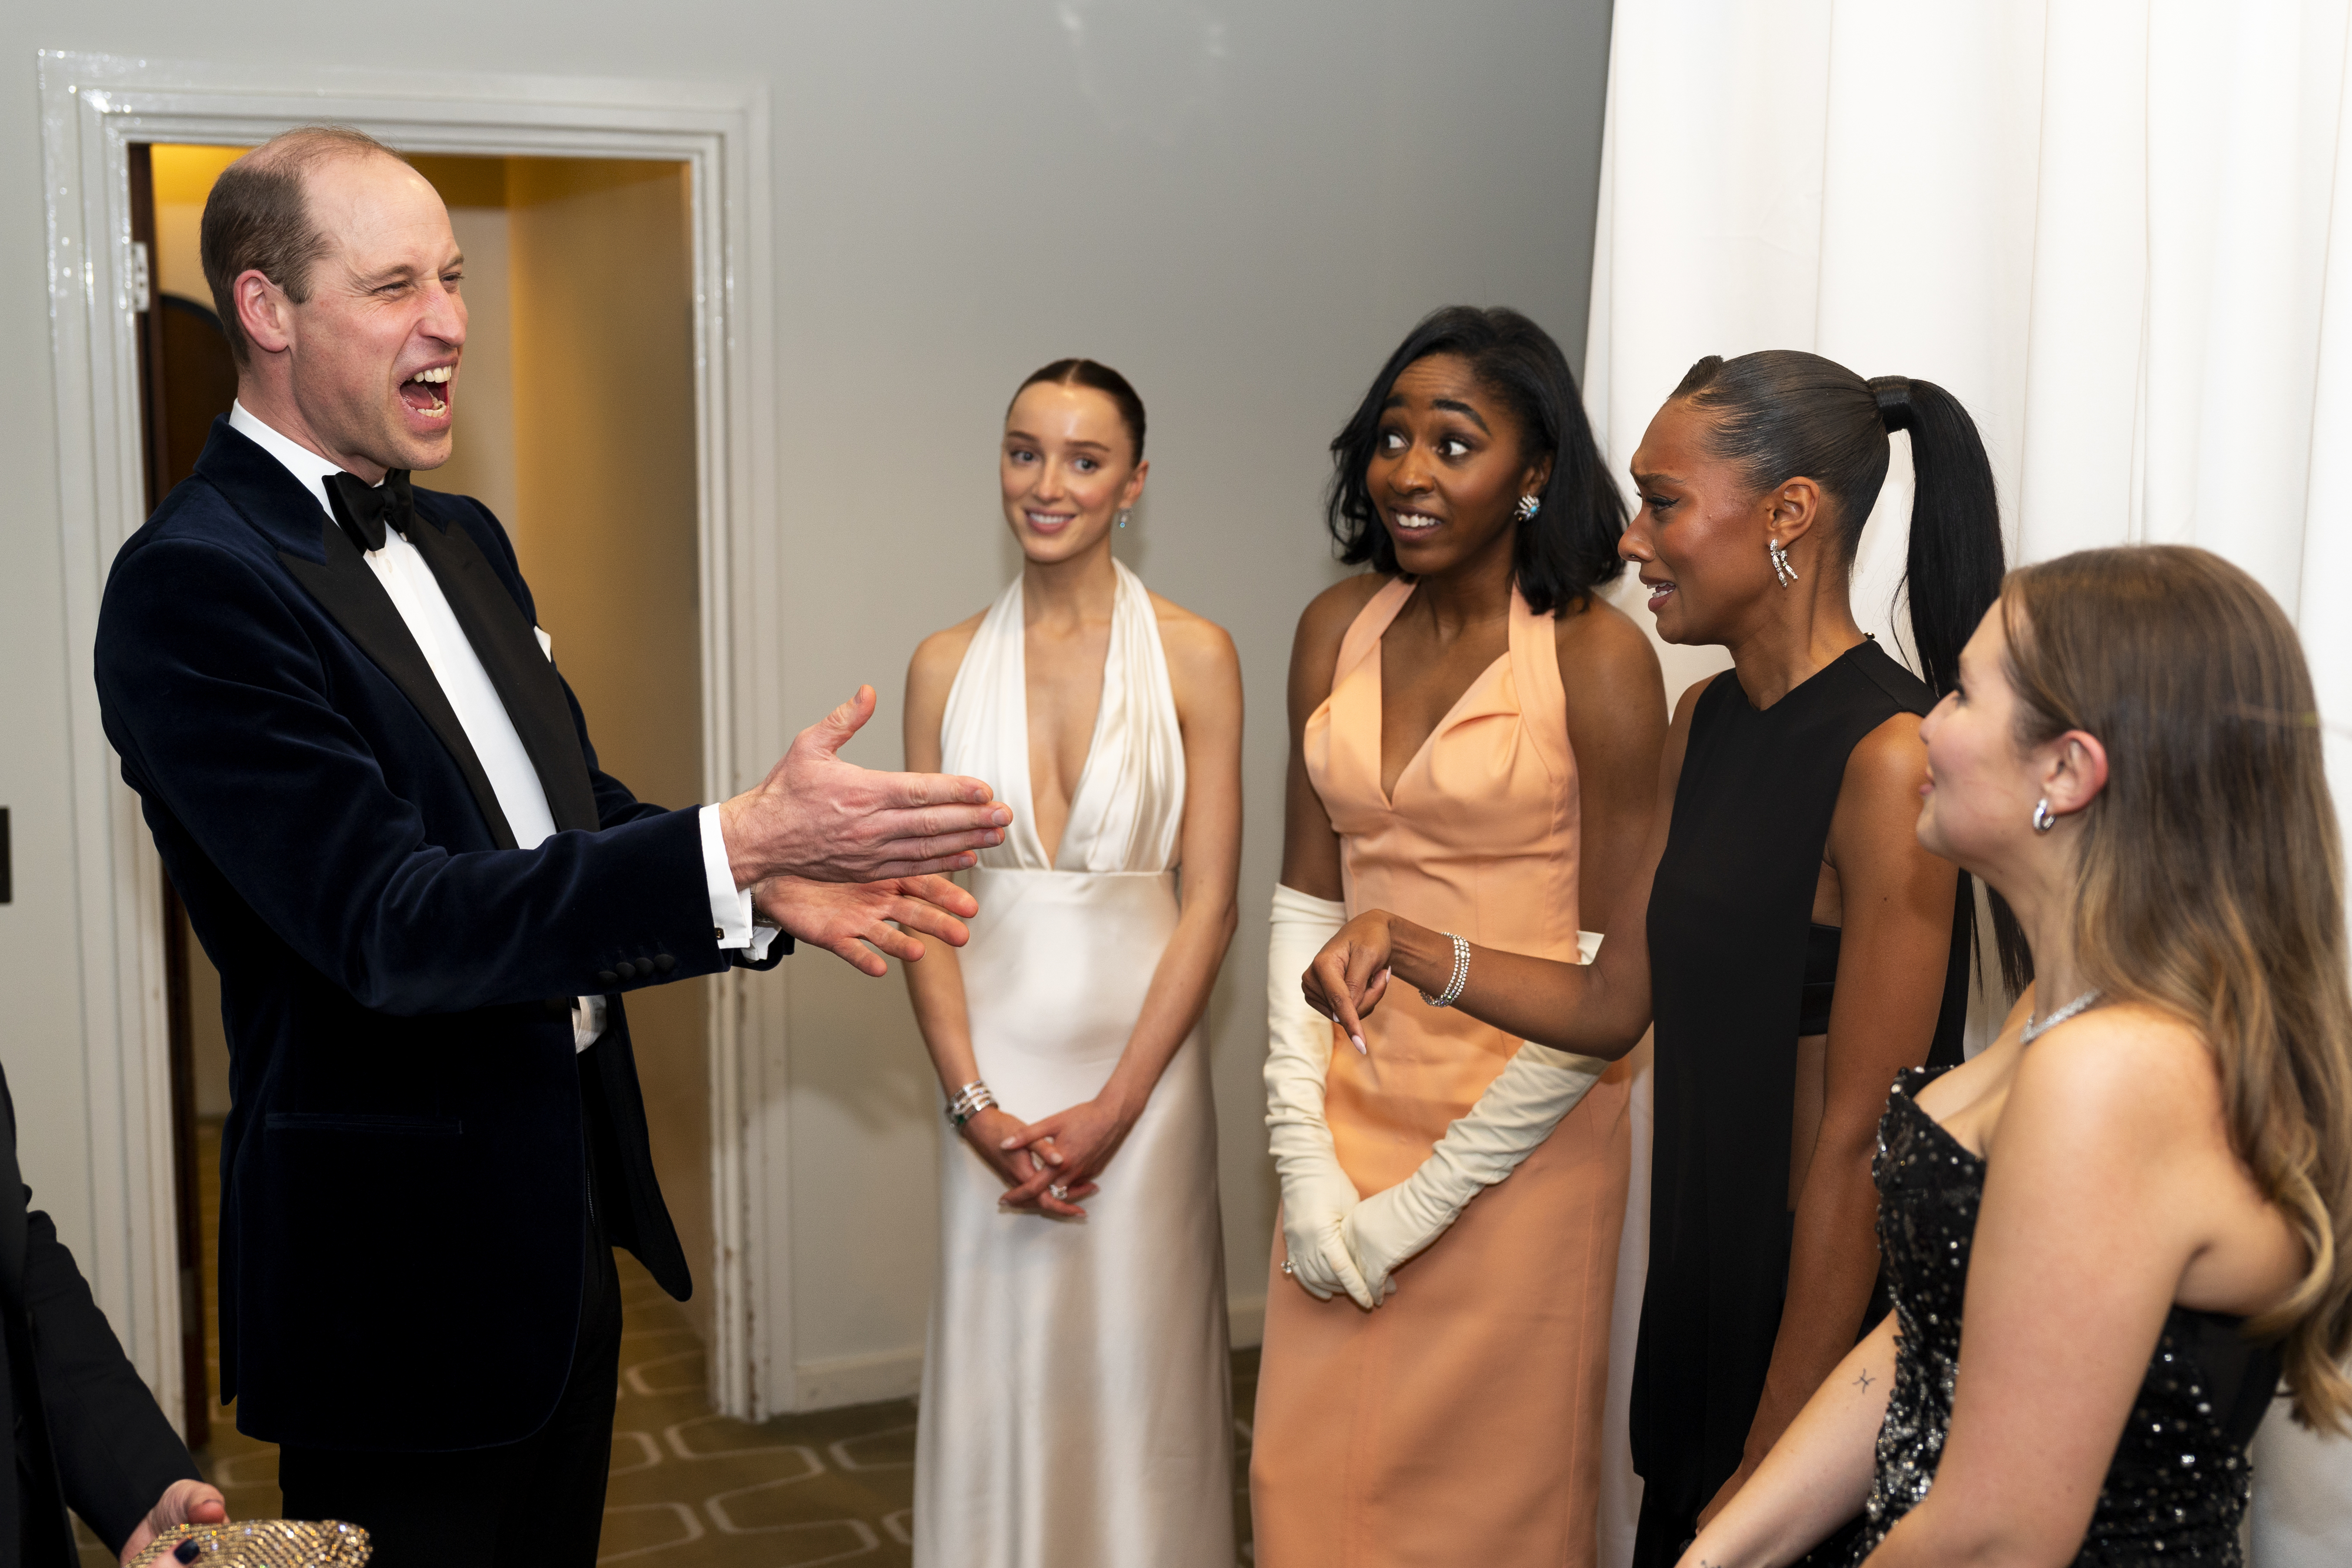 Prince William in a tuxedo greeting four women in elegant evening gowns at a formal event